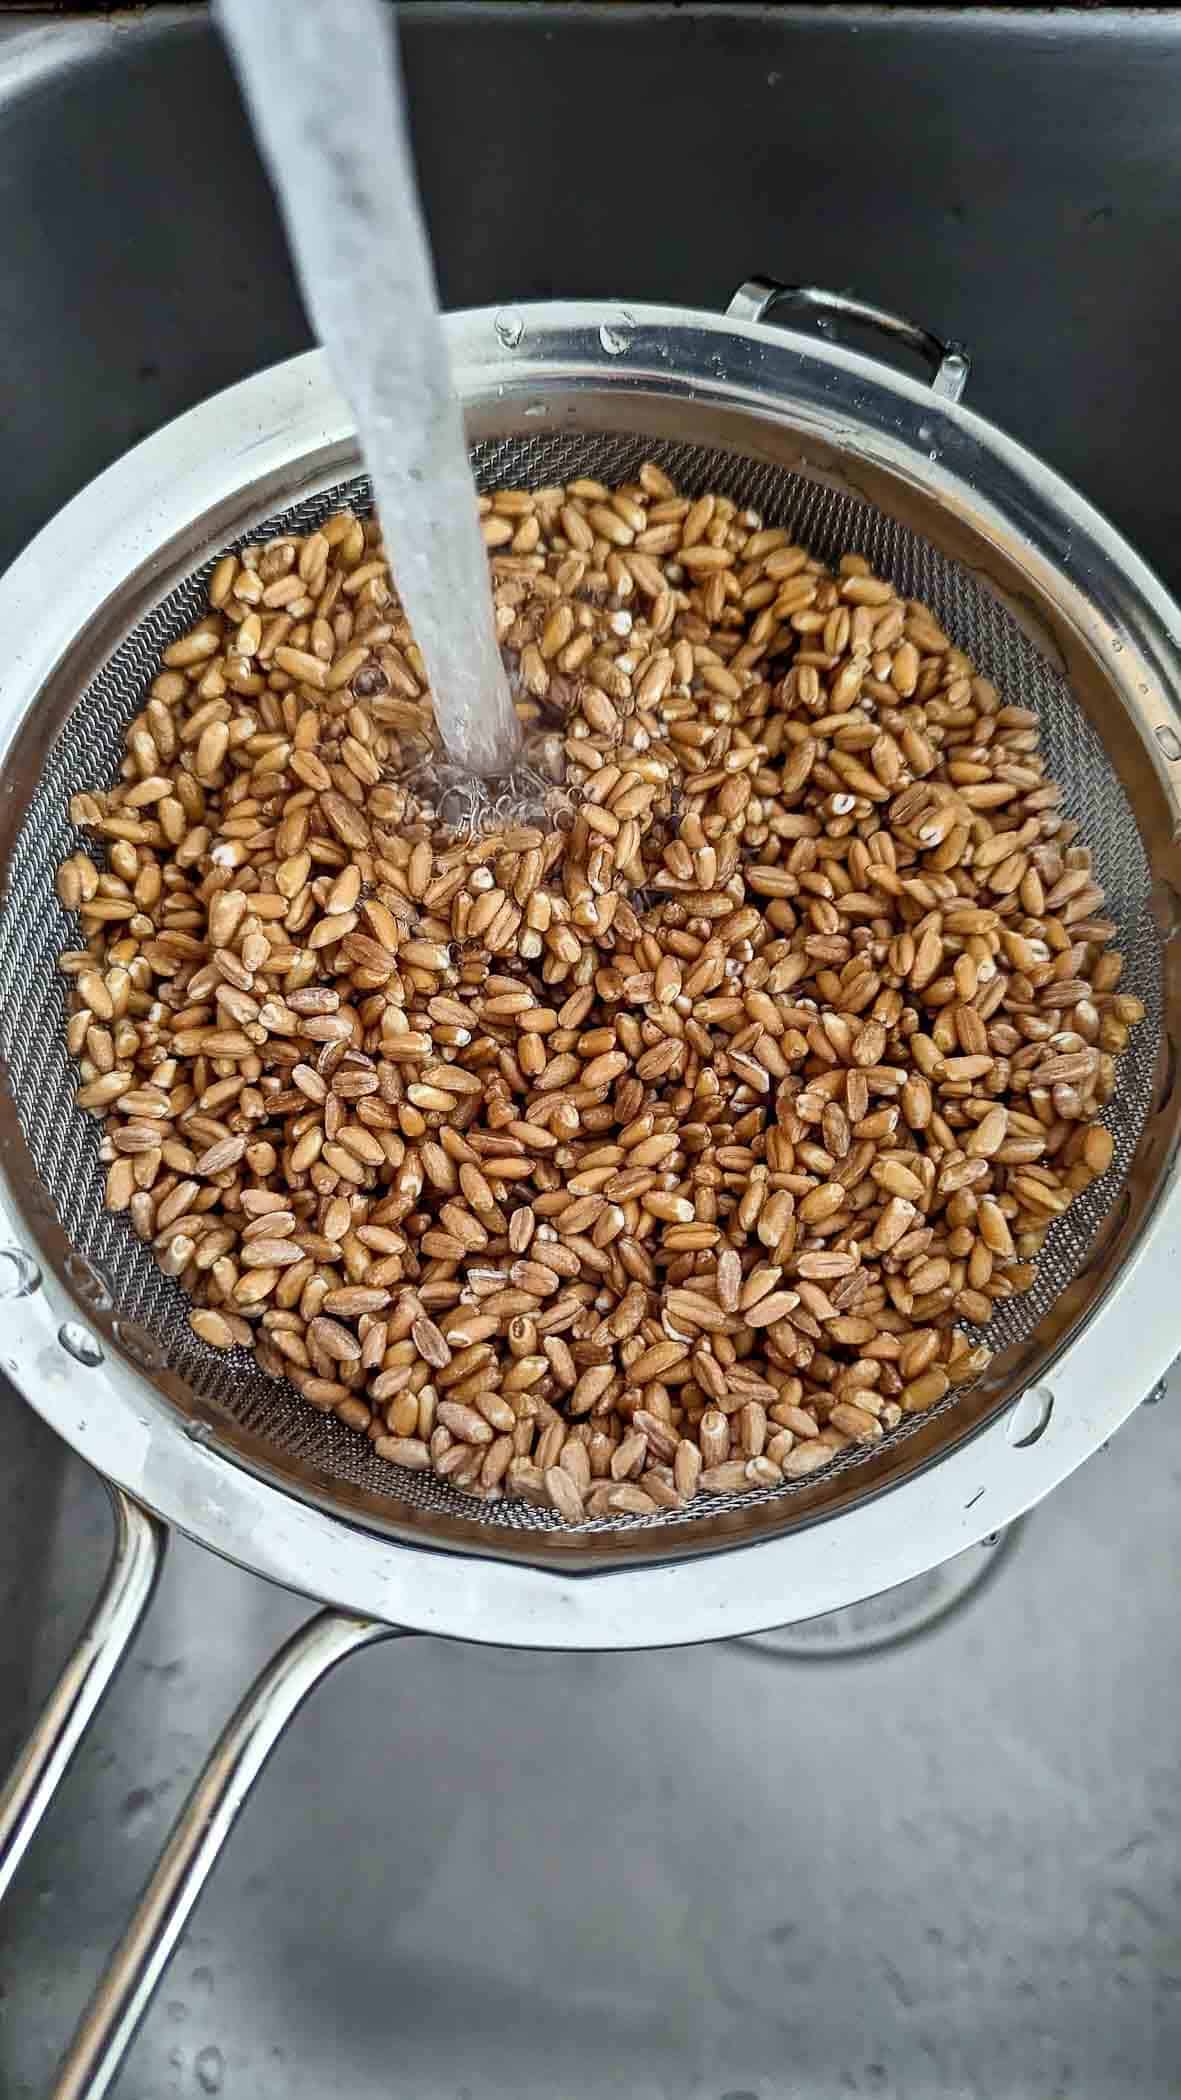 farro in a mesh sieve being rinsed under cold water.